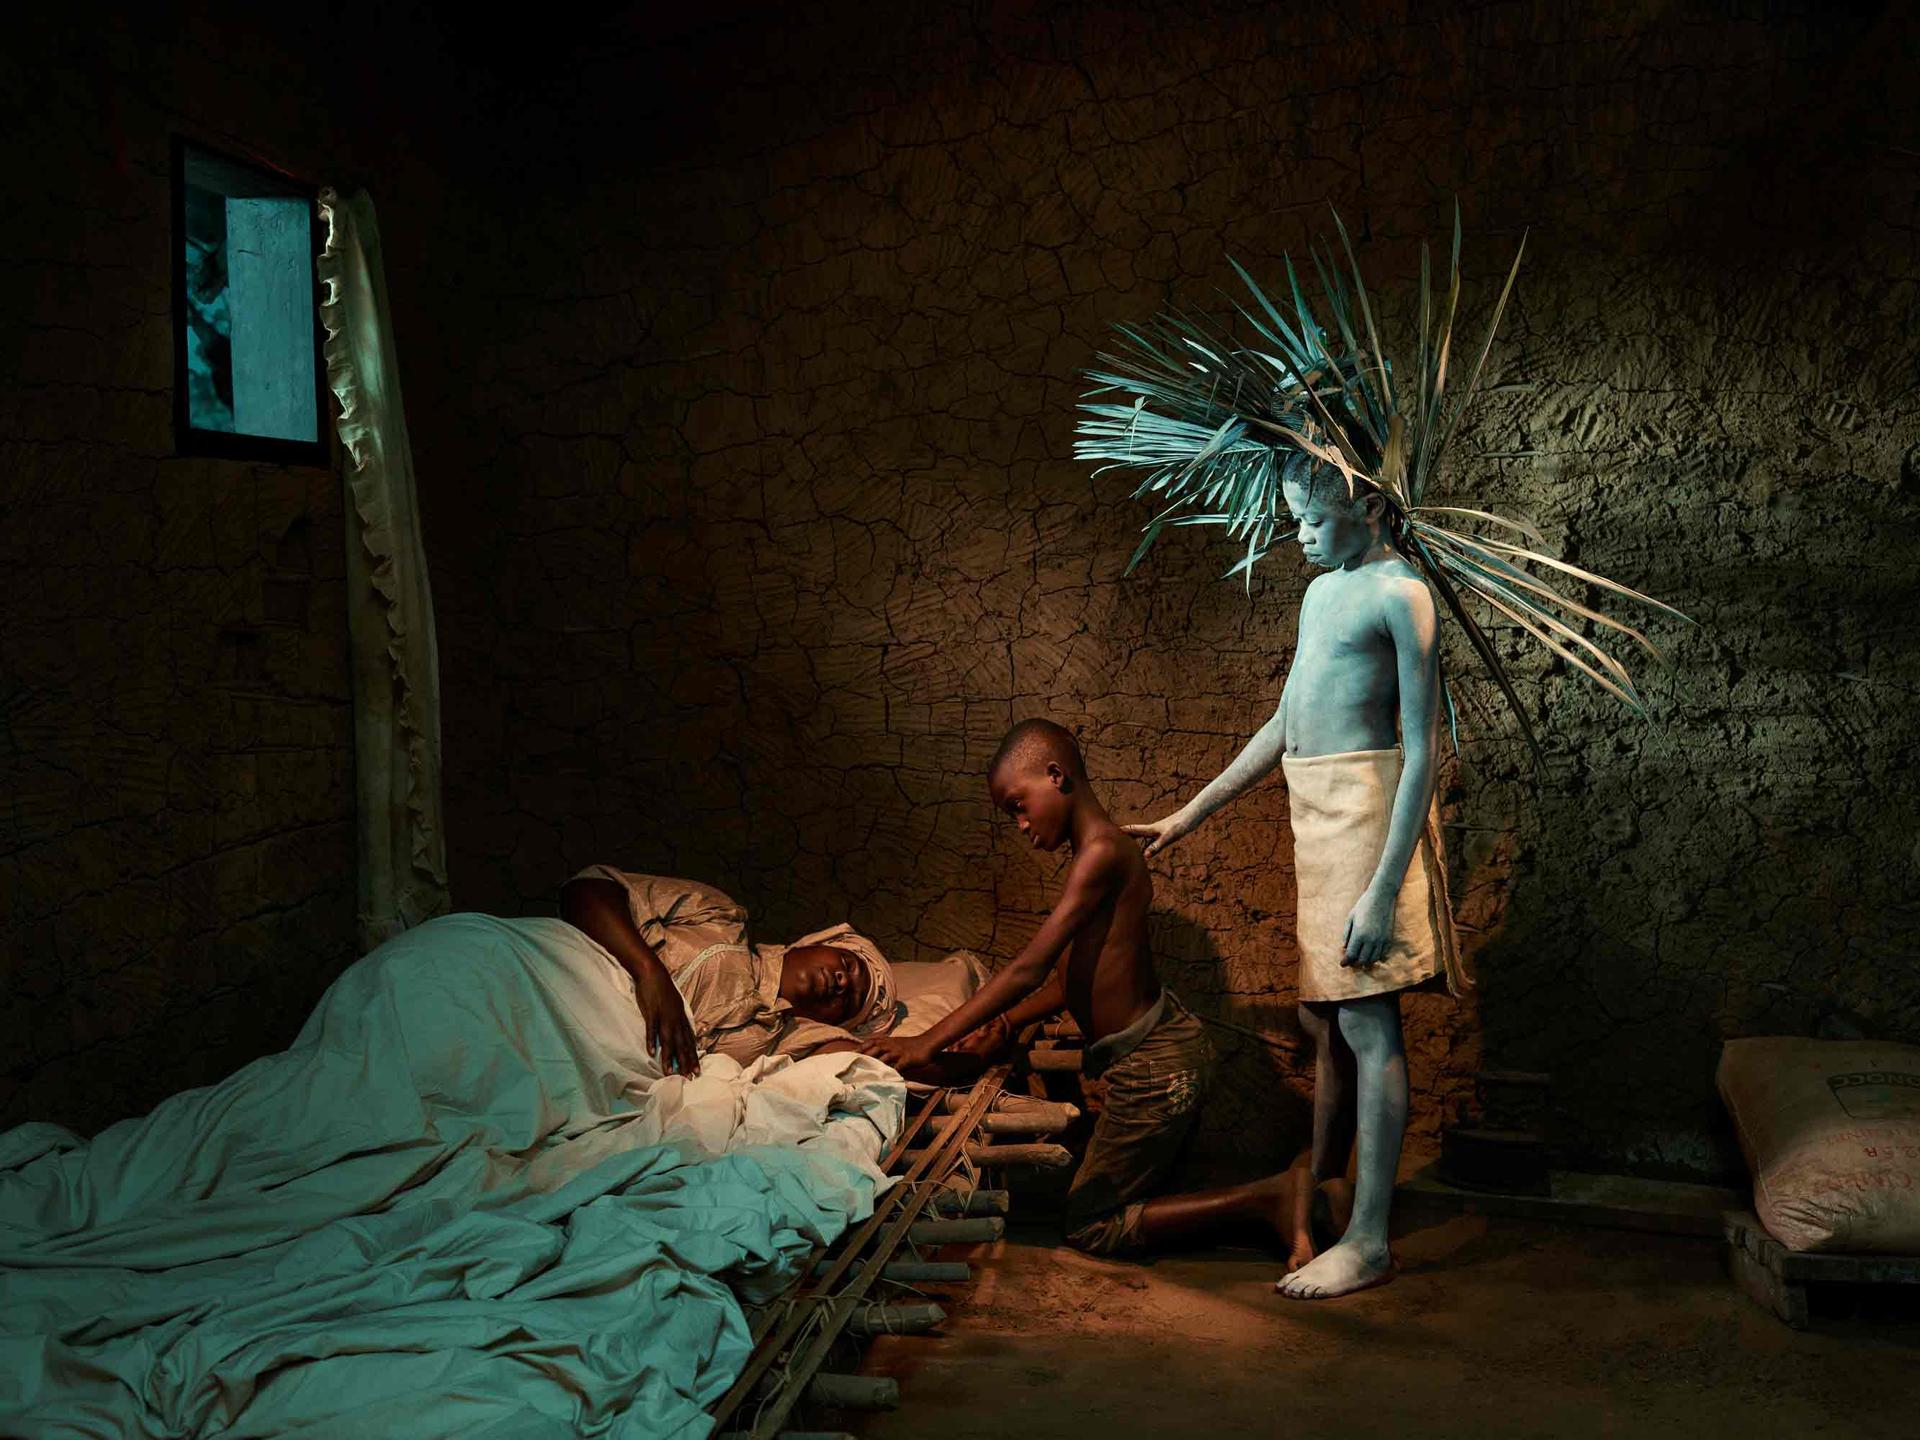 A boy painted white and wearing a headdress of wooden sticks stands over a person lying in bedding on the floor